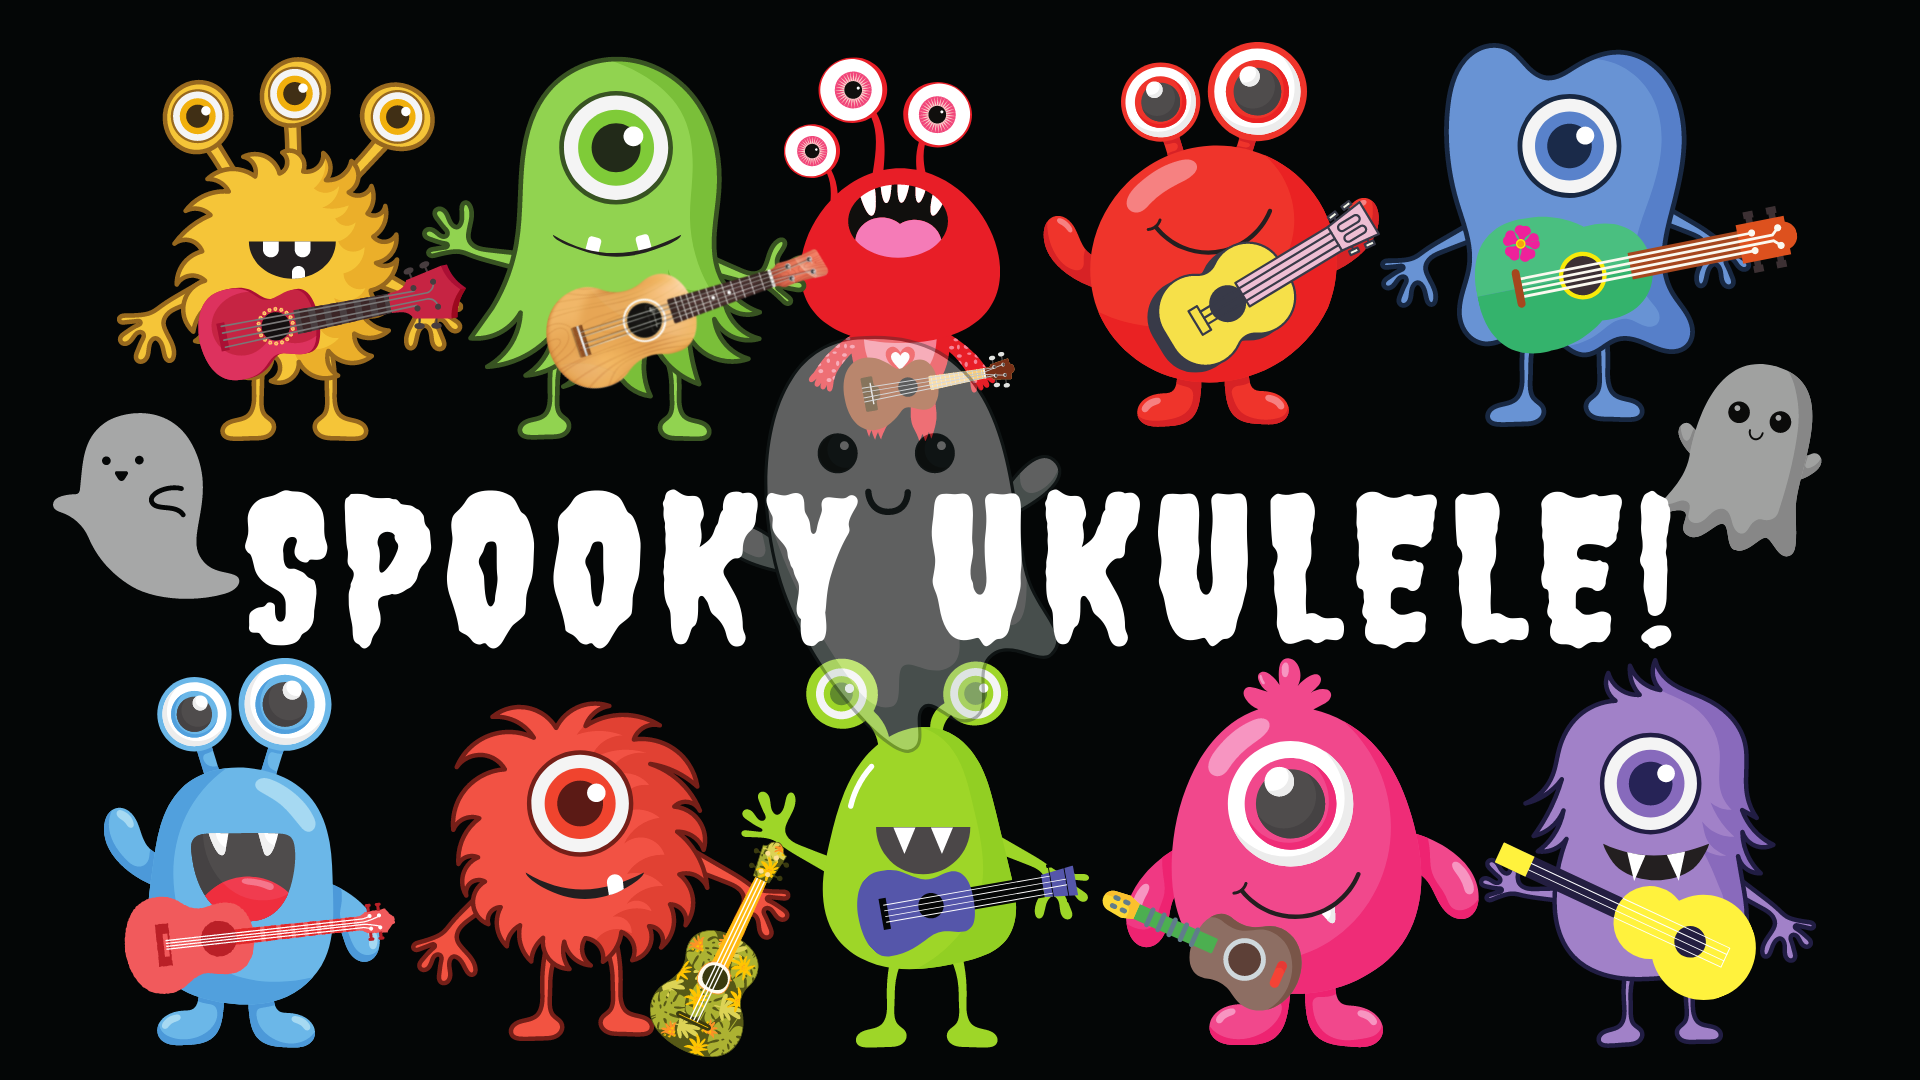 spooky ukulele course with lots of ghosts with ukuleles